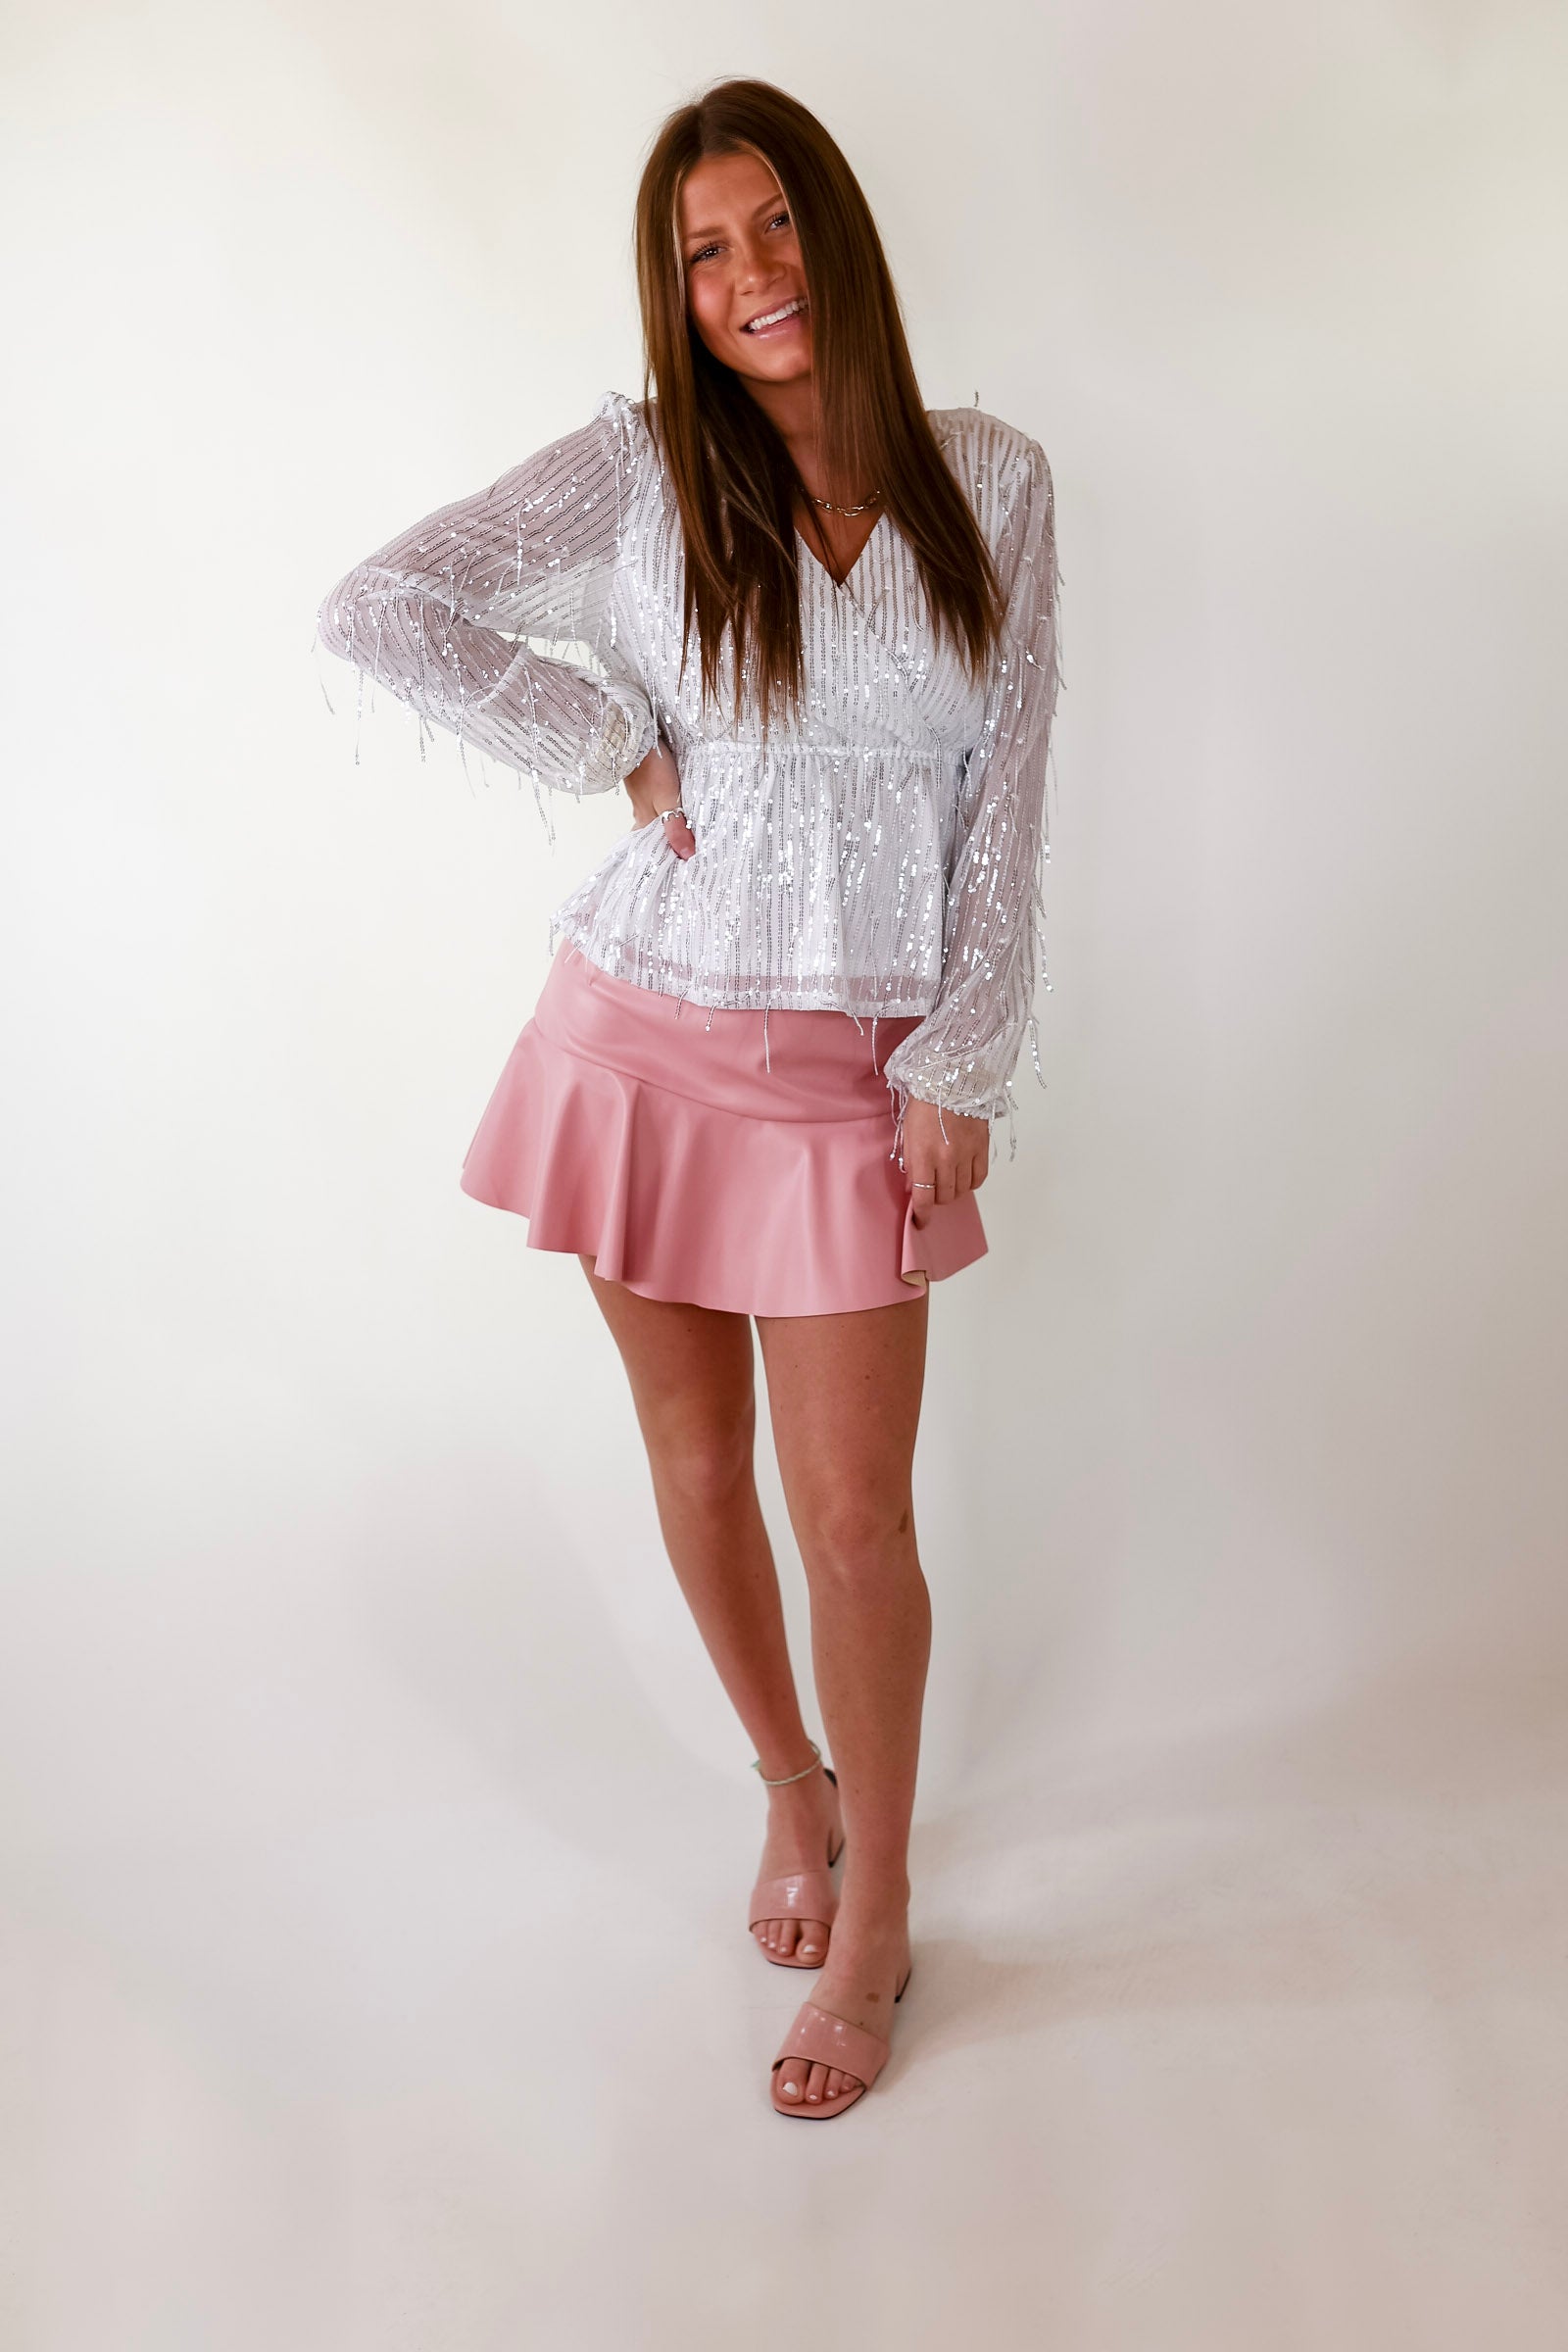 Full Of Charm Sequin Fringe Peplum Top in White - Giddy Up Glamour Boutique